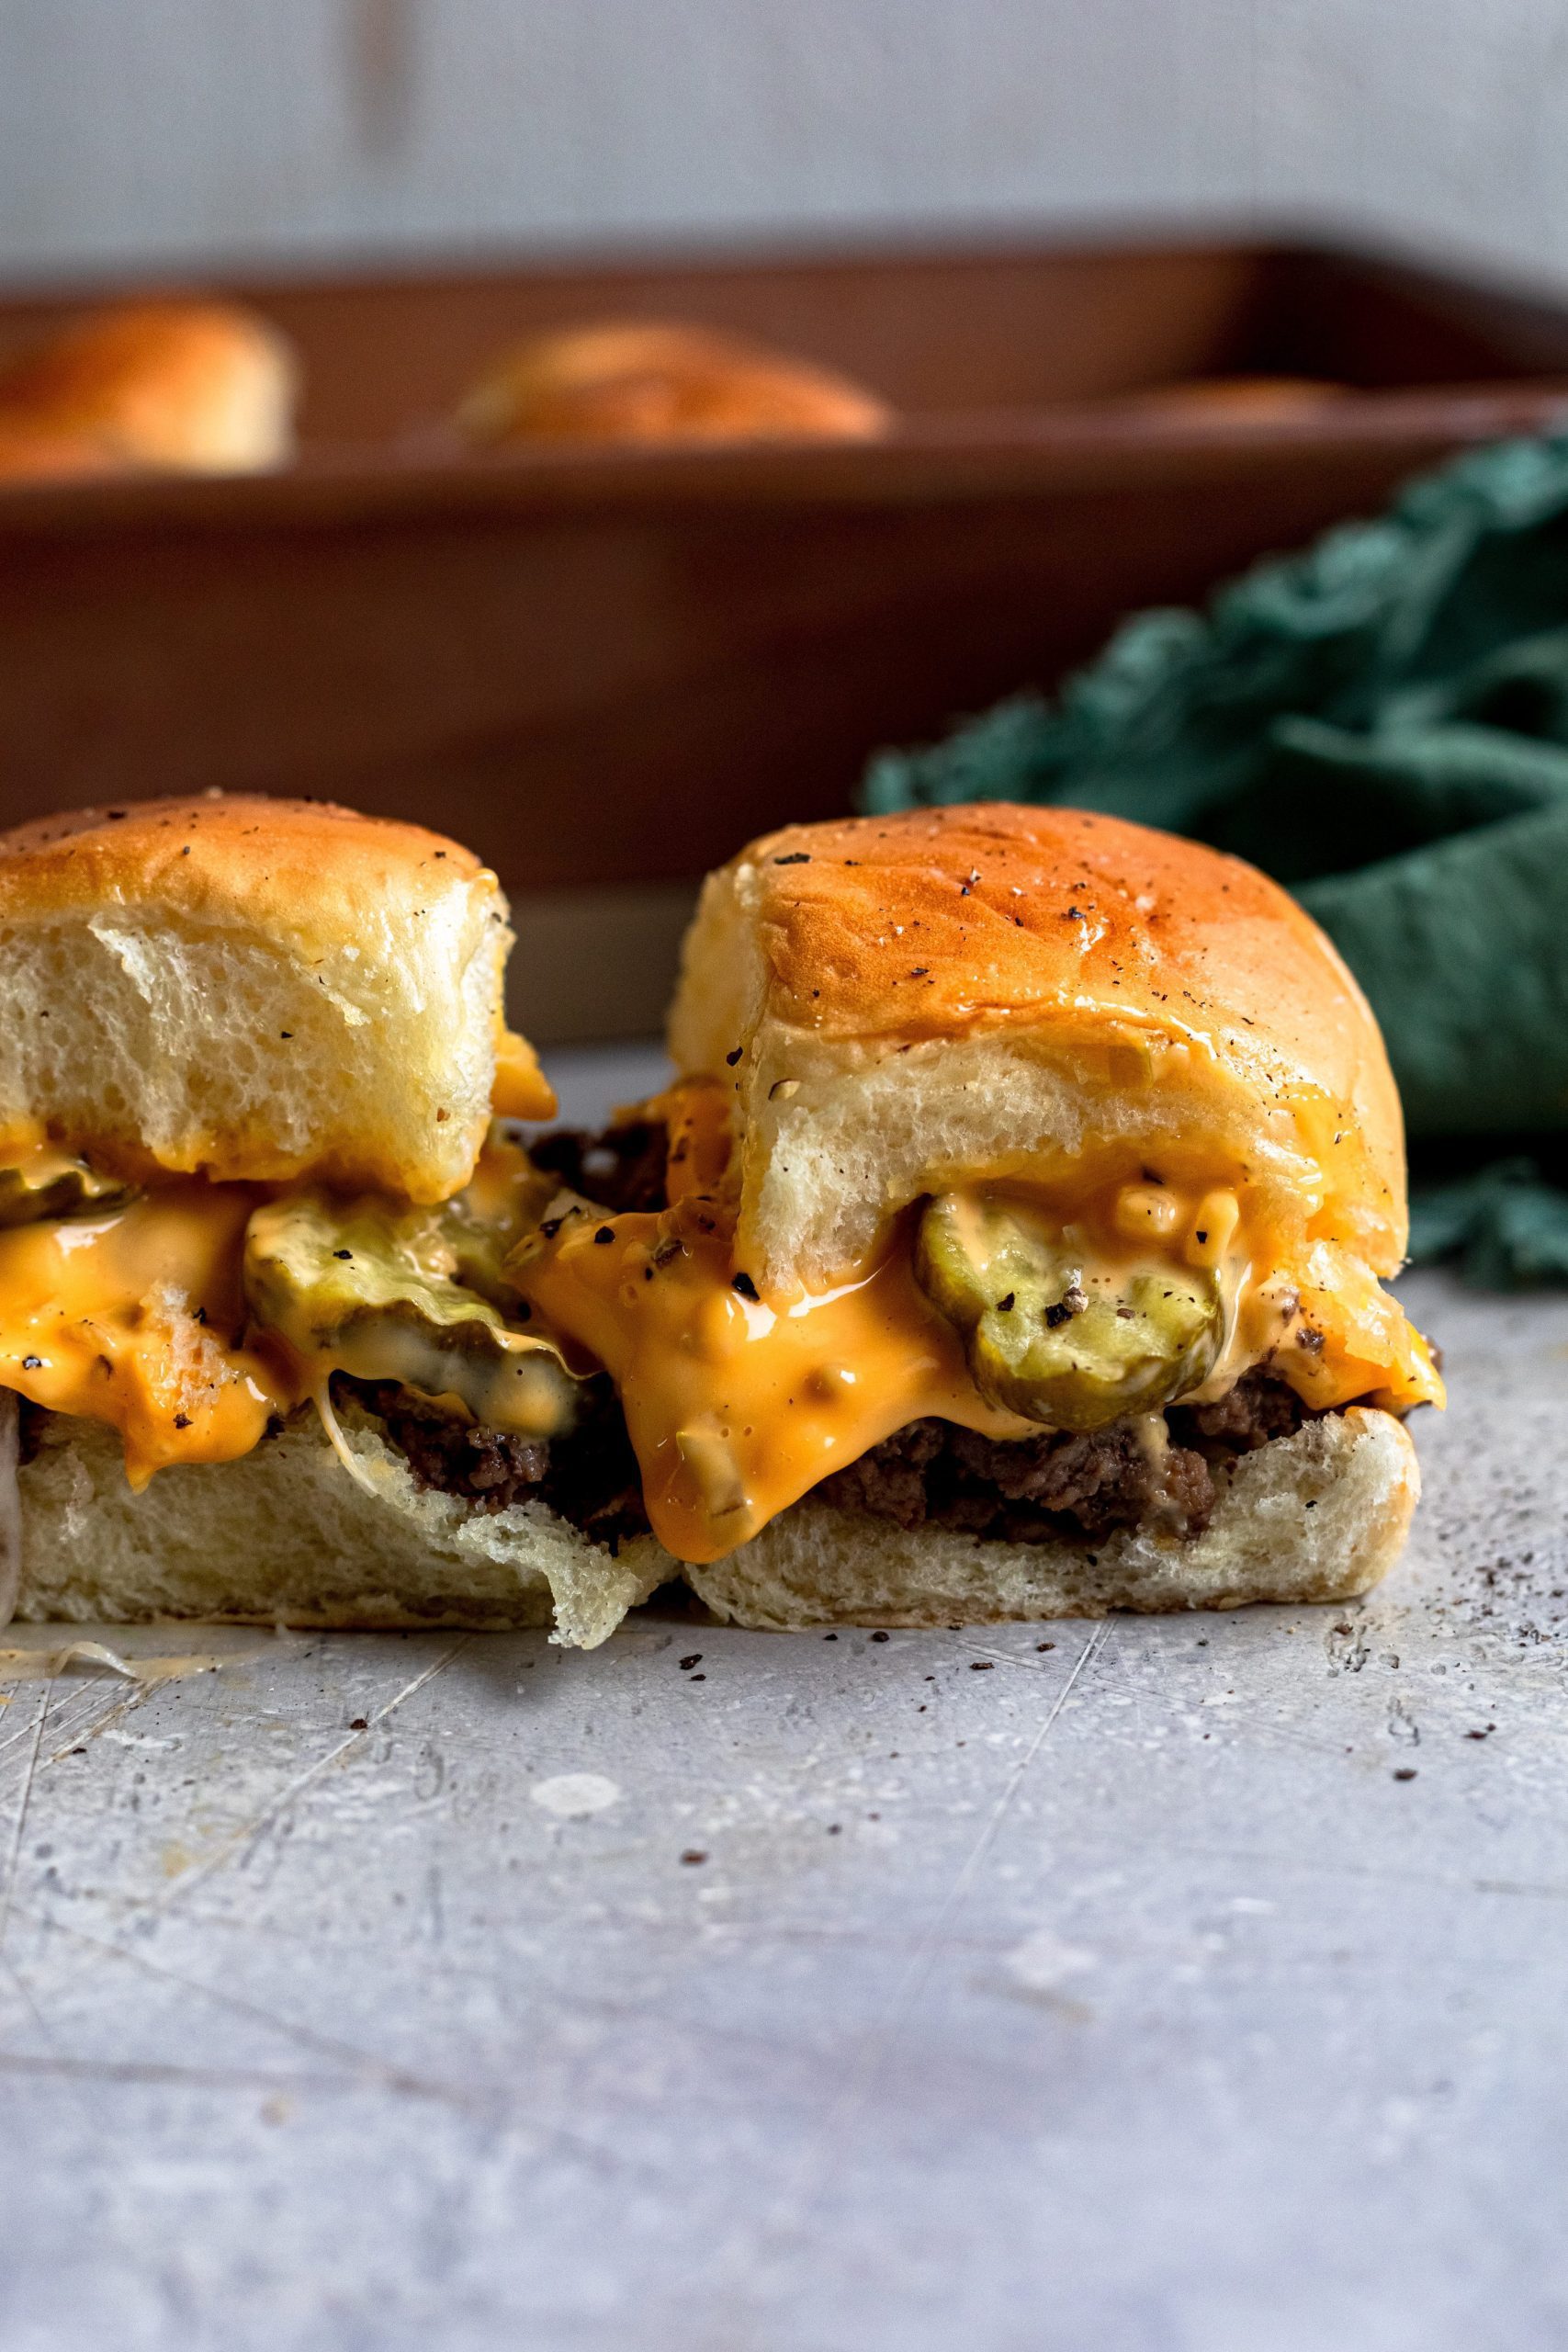 Side profile of 2 baked cheeseburger sliders showing glossy bun, melted cheese, pickle and juicy beef.